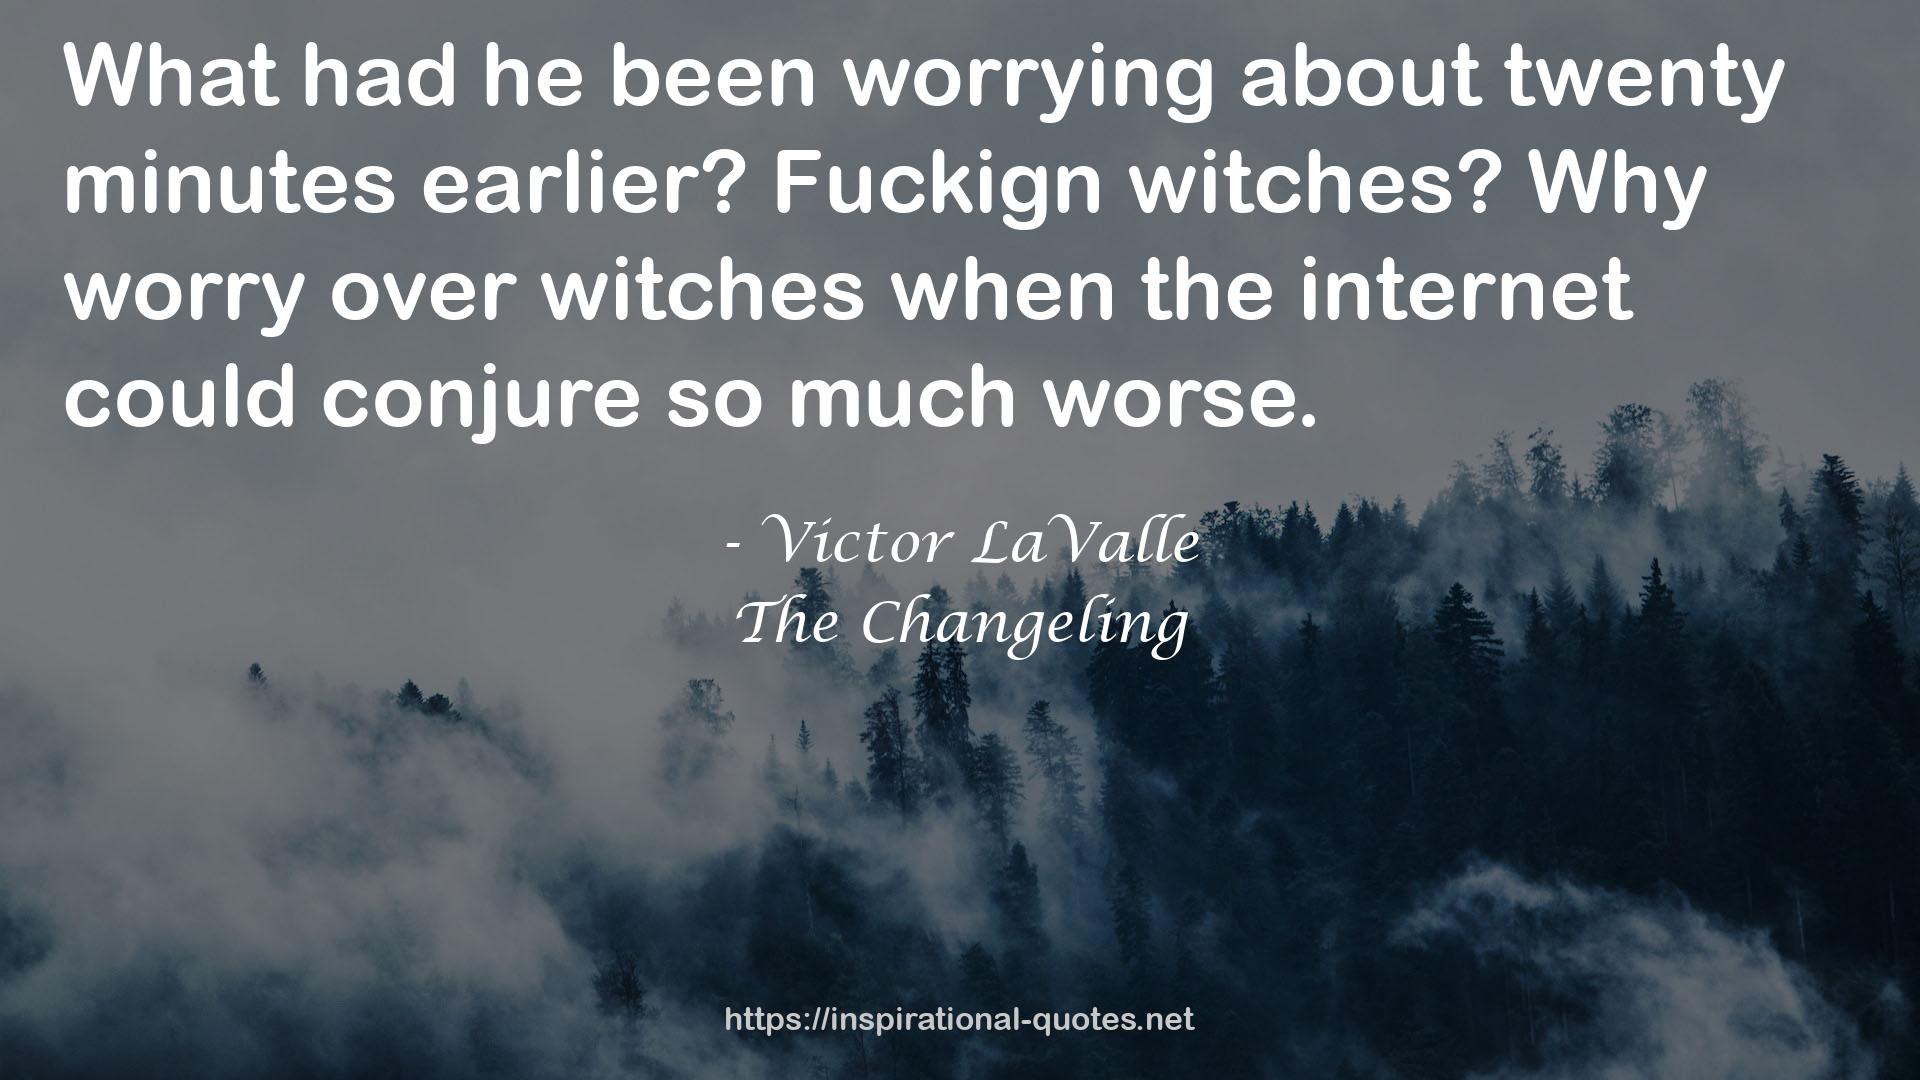 The Changeling QUOTES